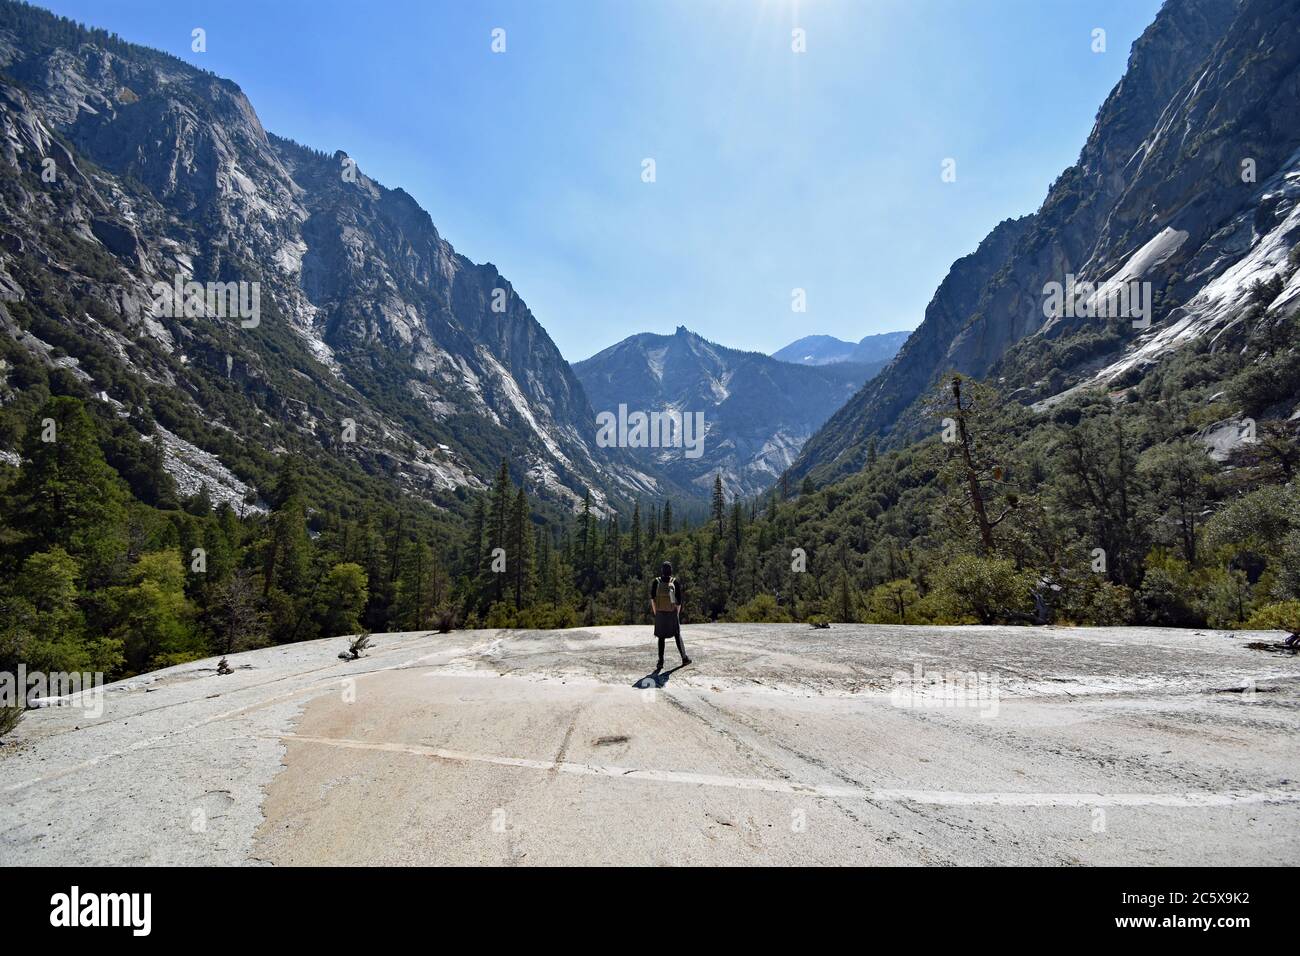 A Hiker takes in the view from Mist Falls trail in Paradise Valley.  Looking out over steep mountain cliffs and forest.  Kings Canyon National Park. Stock Photo